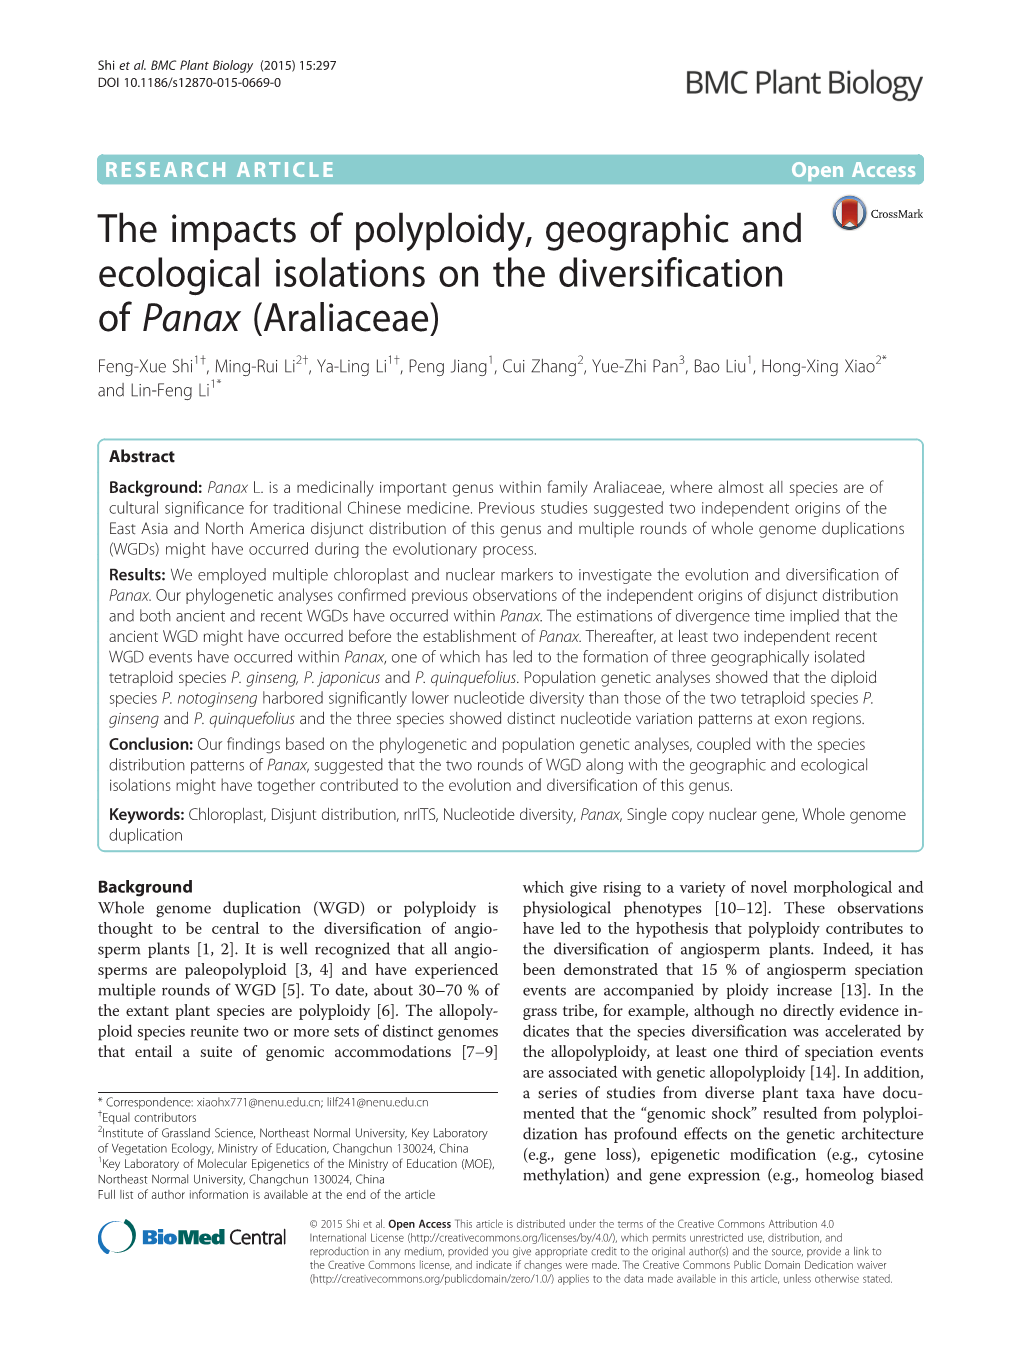 The Impacts of Polyploidy, Geographic and Ecological